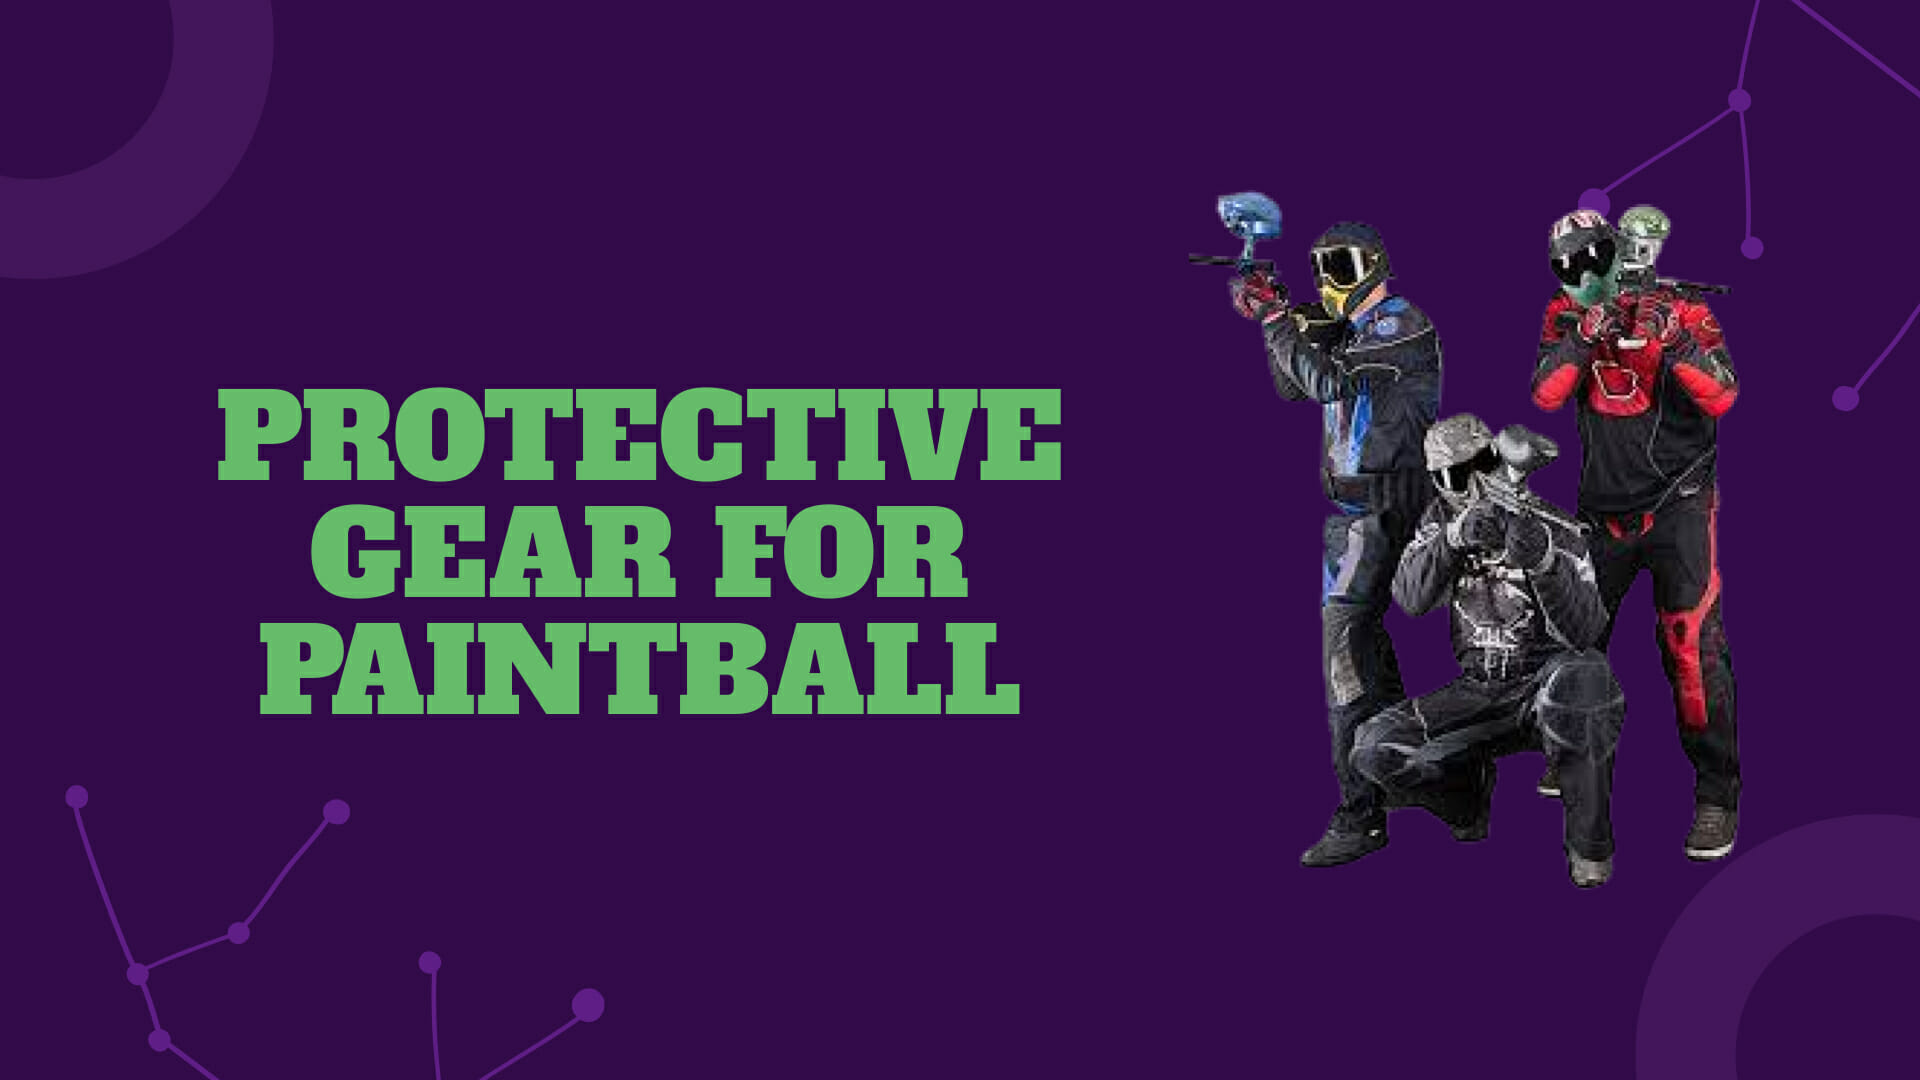 Protective Gear for Paintball